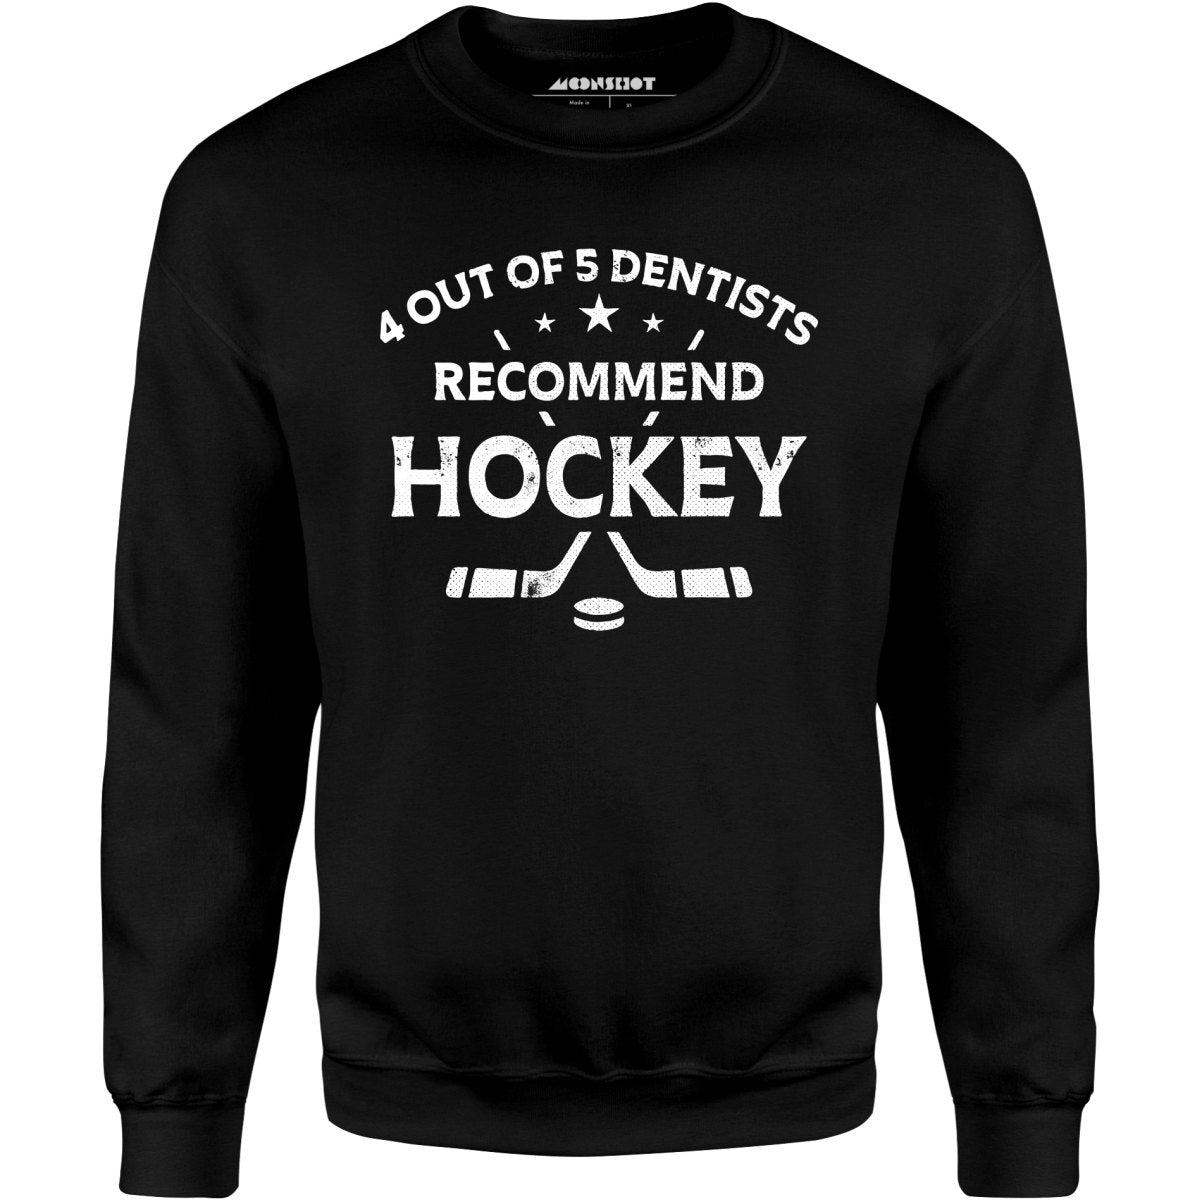 4 Out of 5 Dentists Recommend Hockey - Unisex Sweatshirt